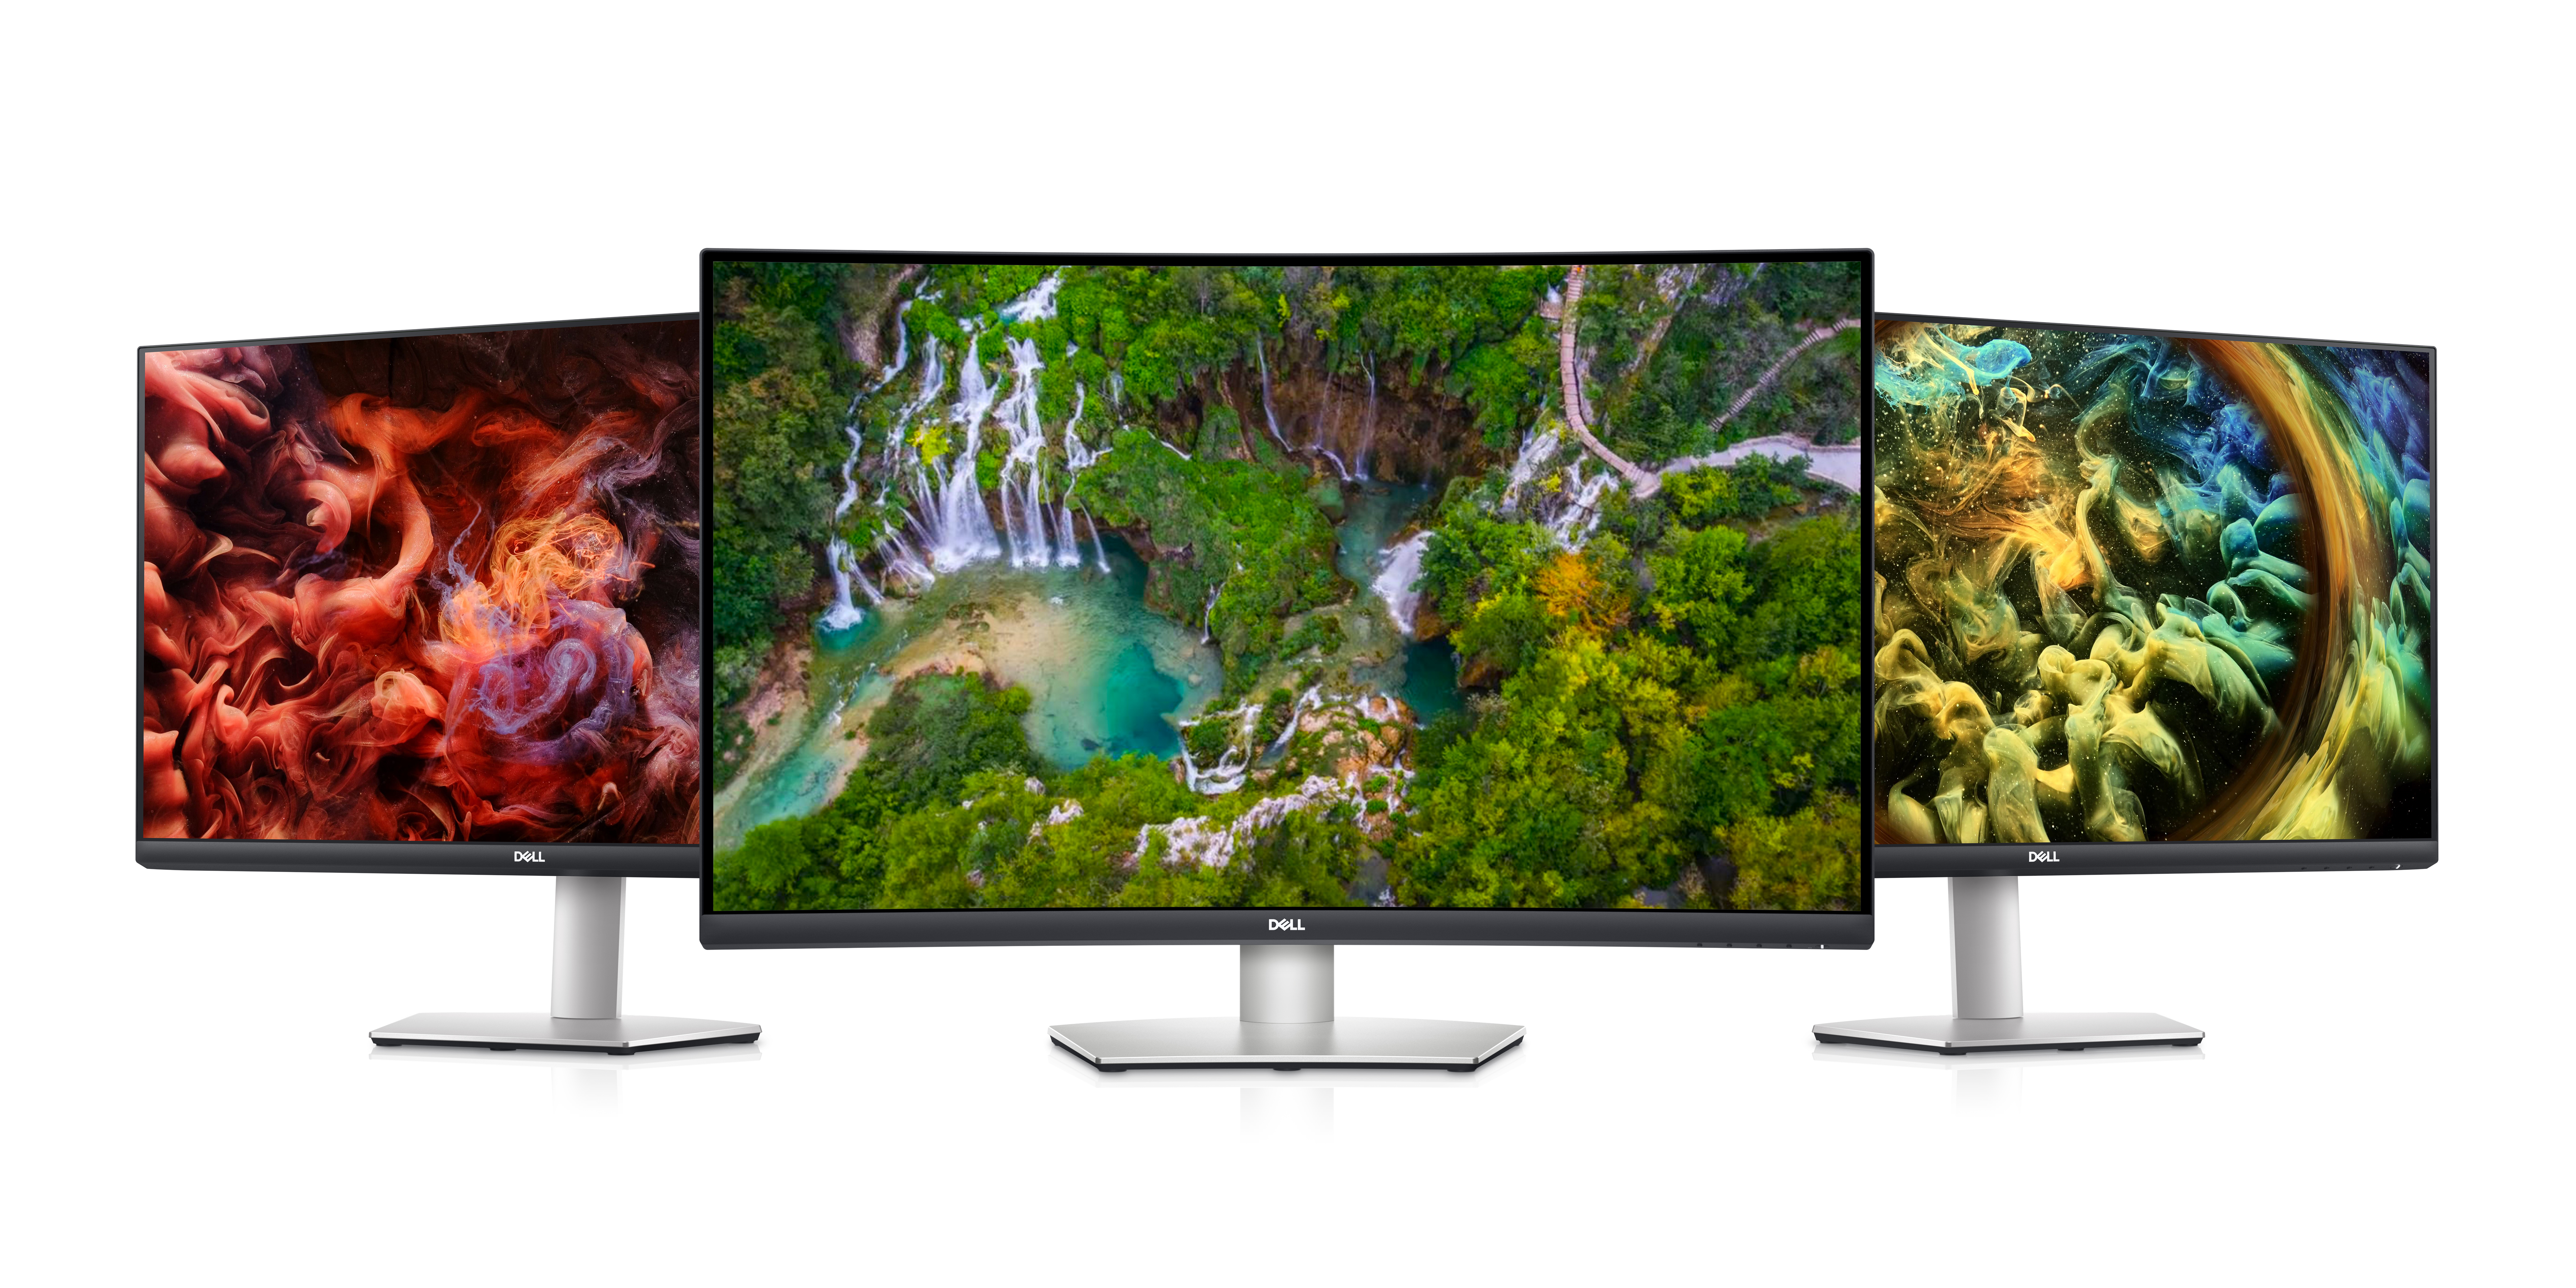 Dell introduces new monitors in its S-series lineup tailored for home  entertainment  News